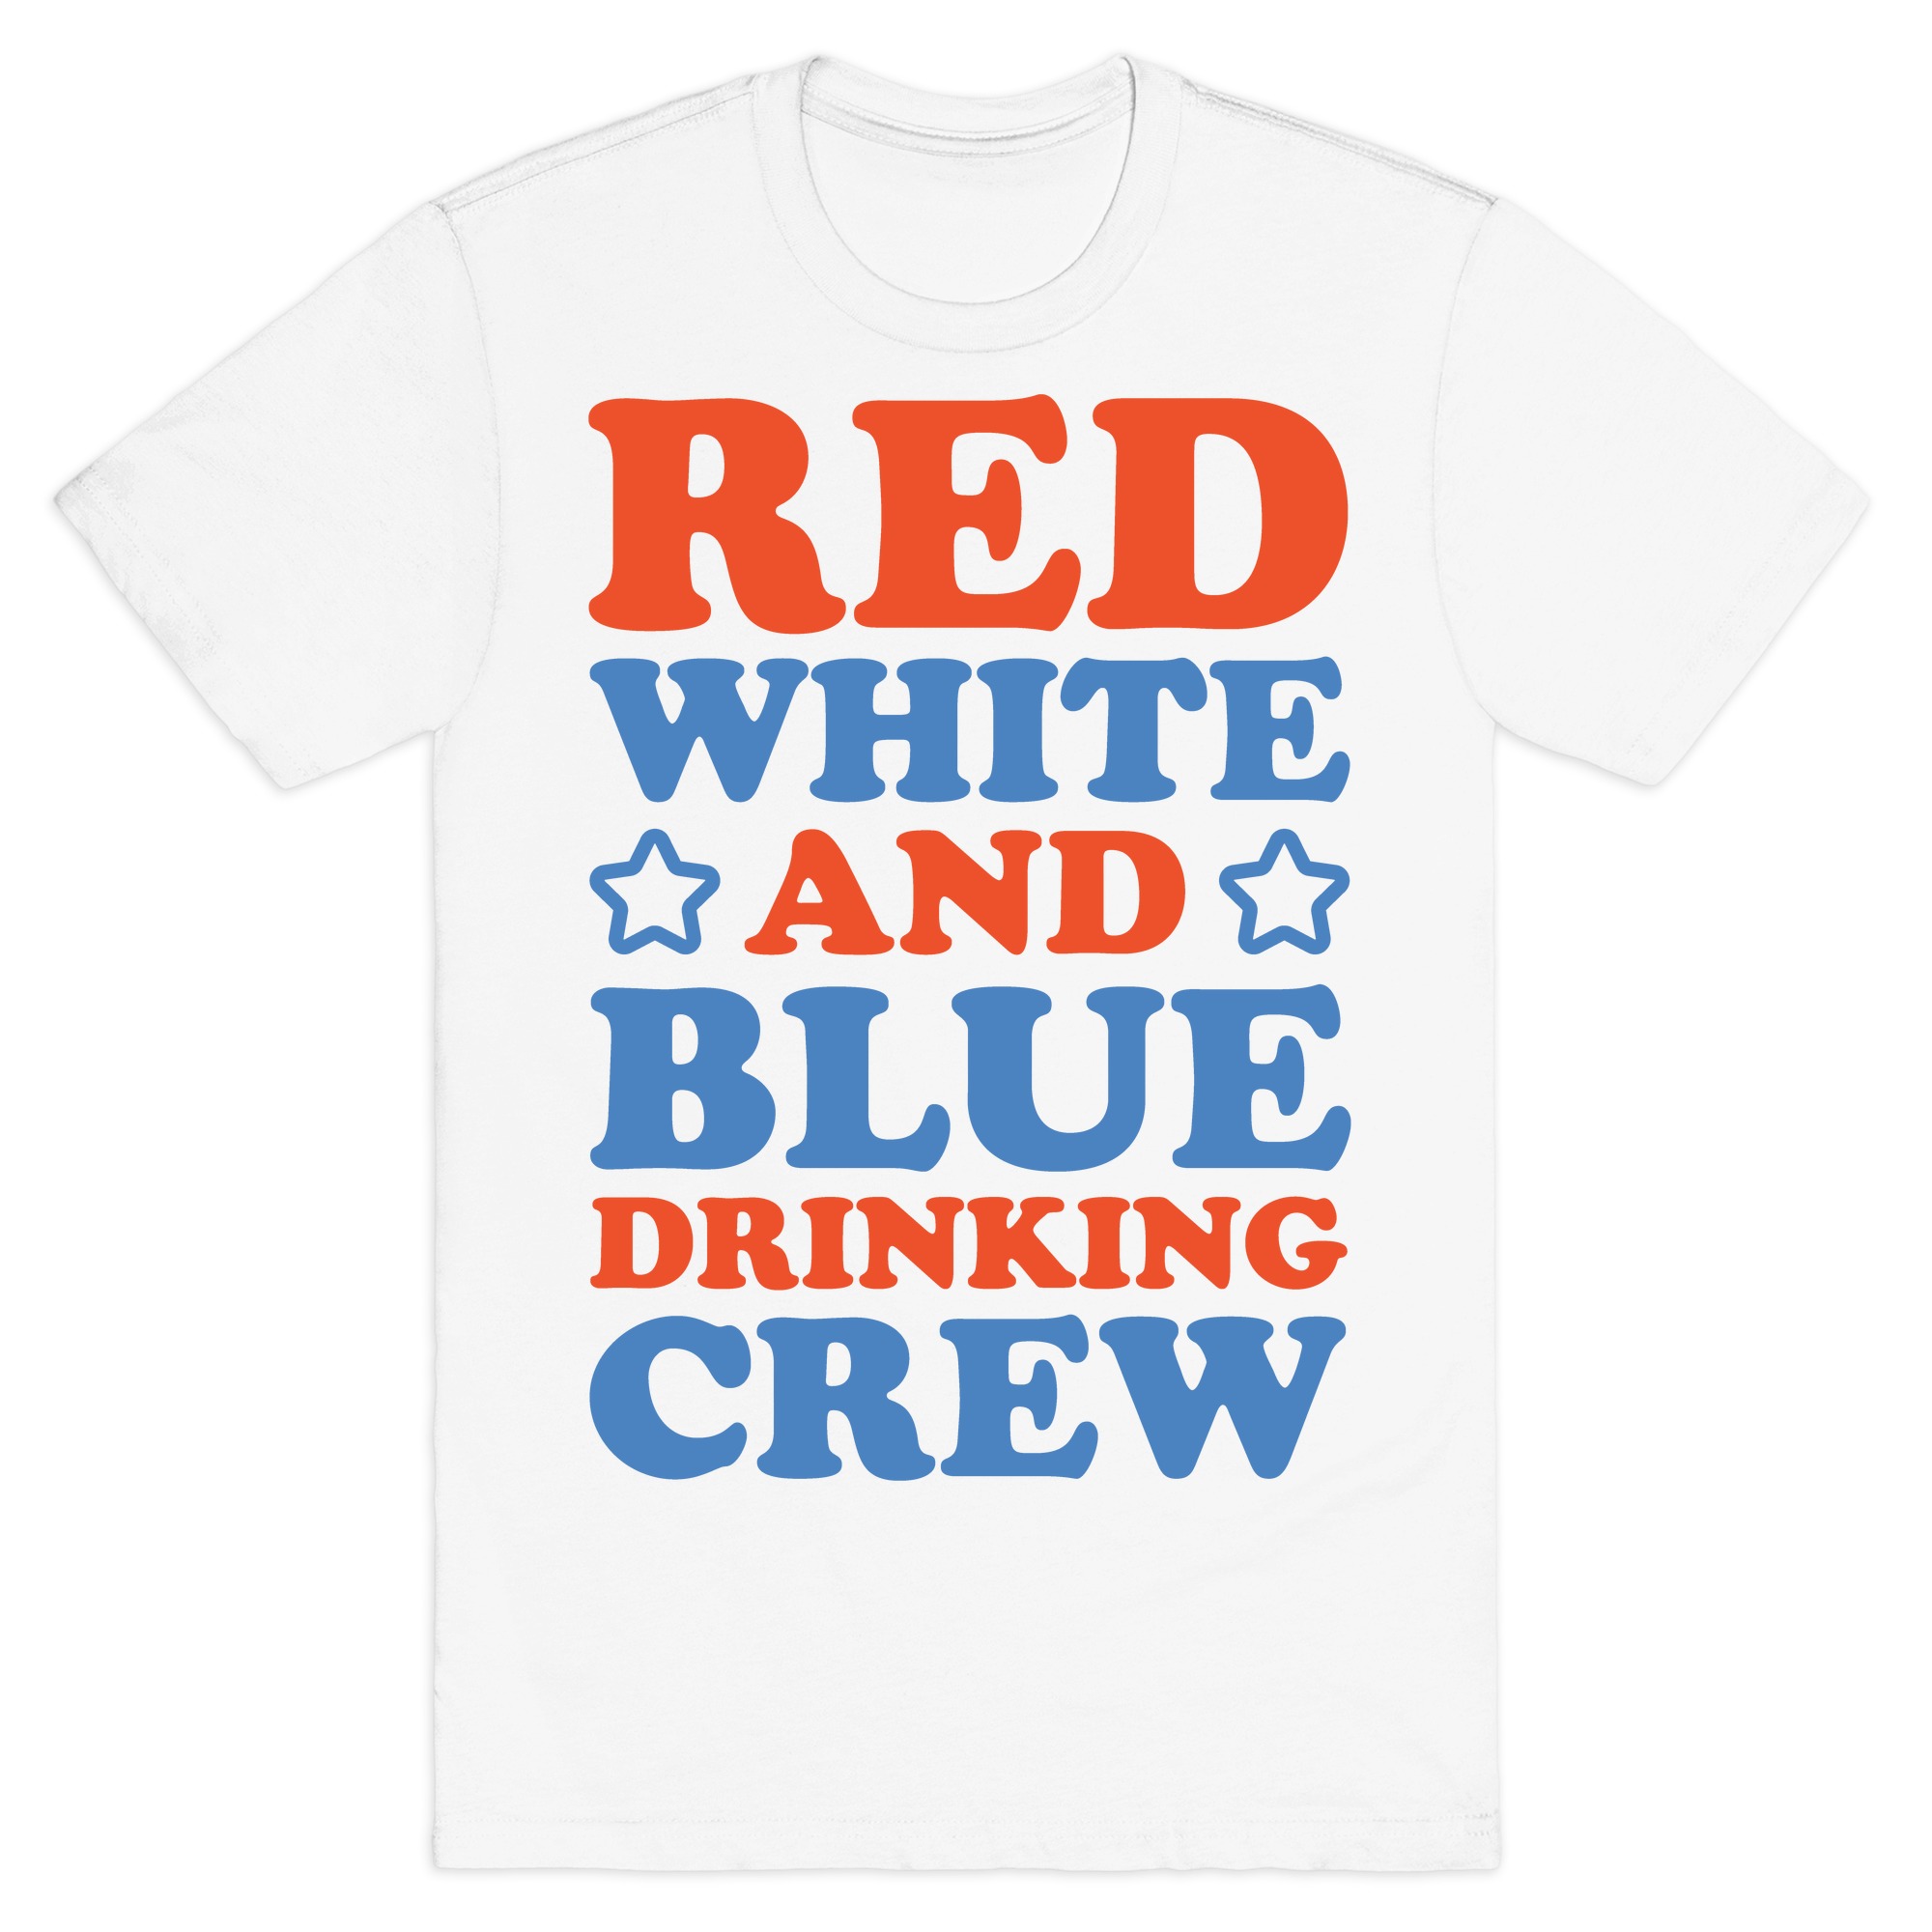 red white and blue tees